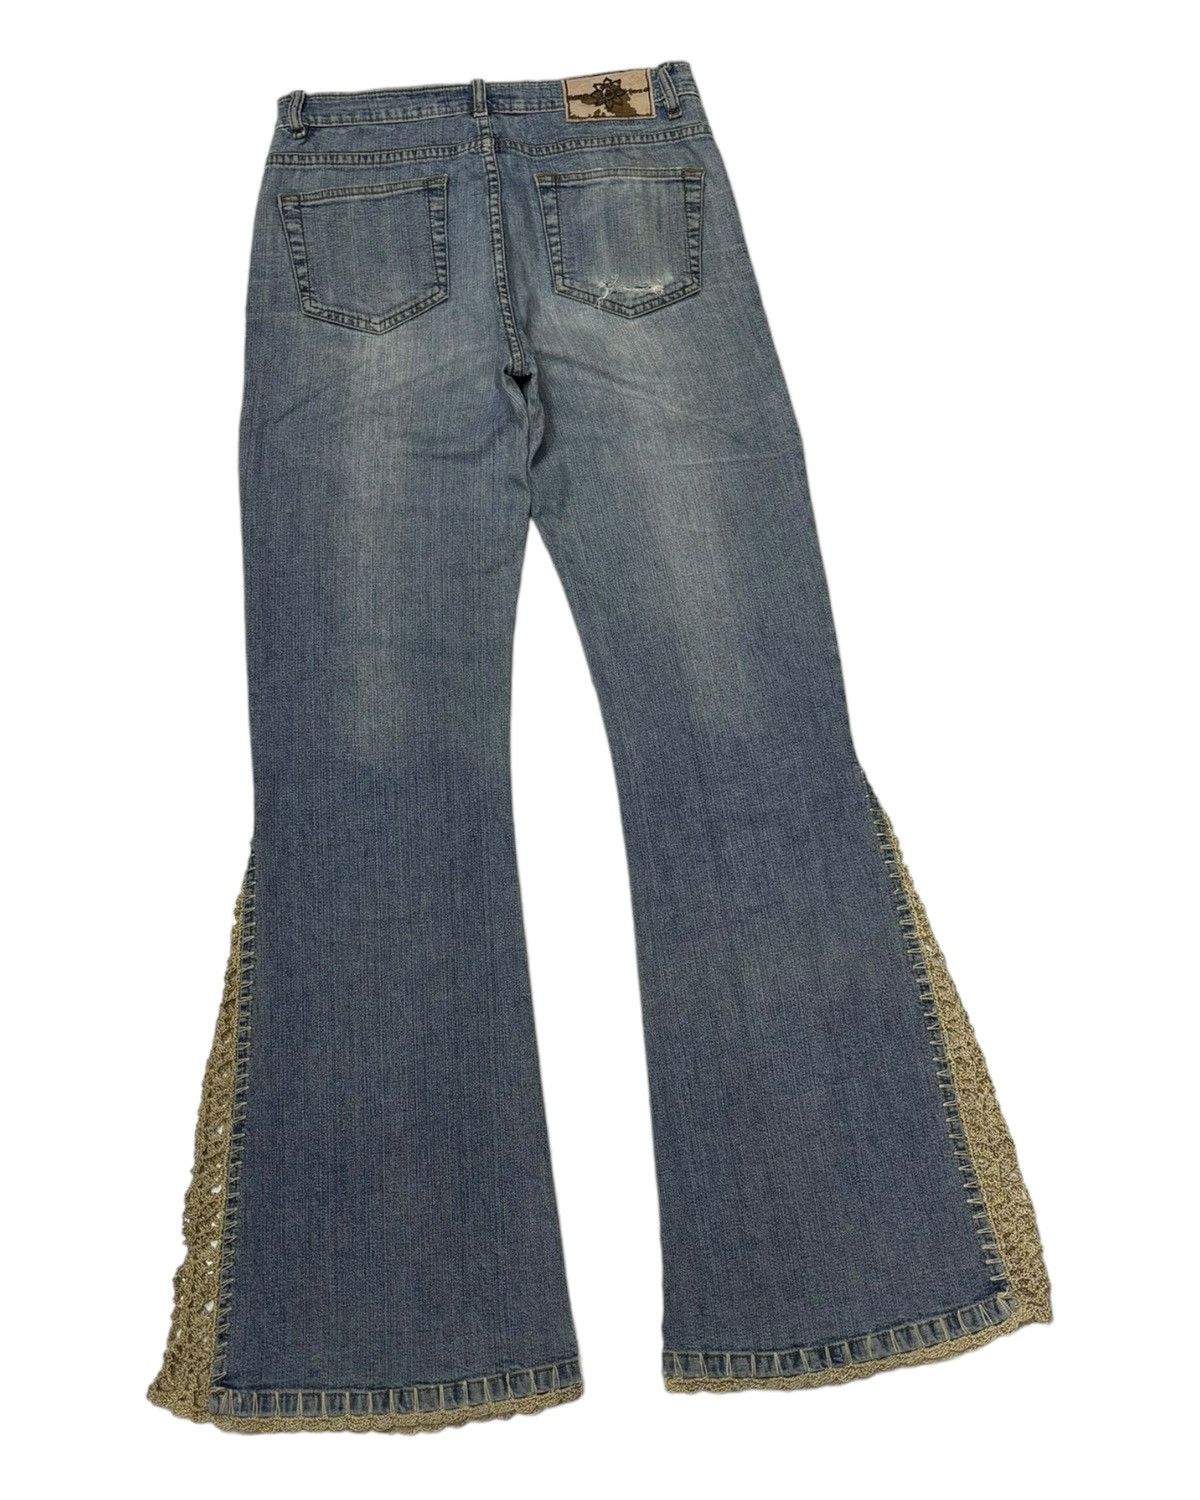 Designer - Vintage Flared Jeans Toco Toco Crochet Bootcut Jeans - 4